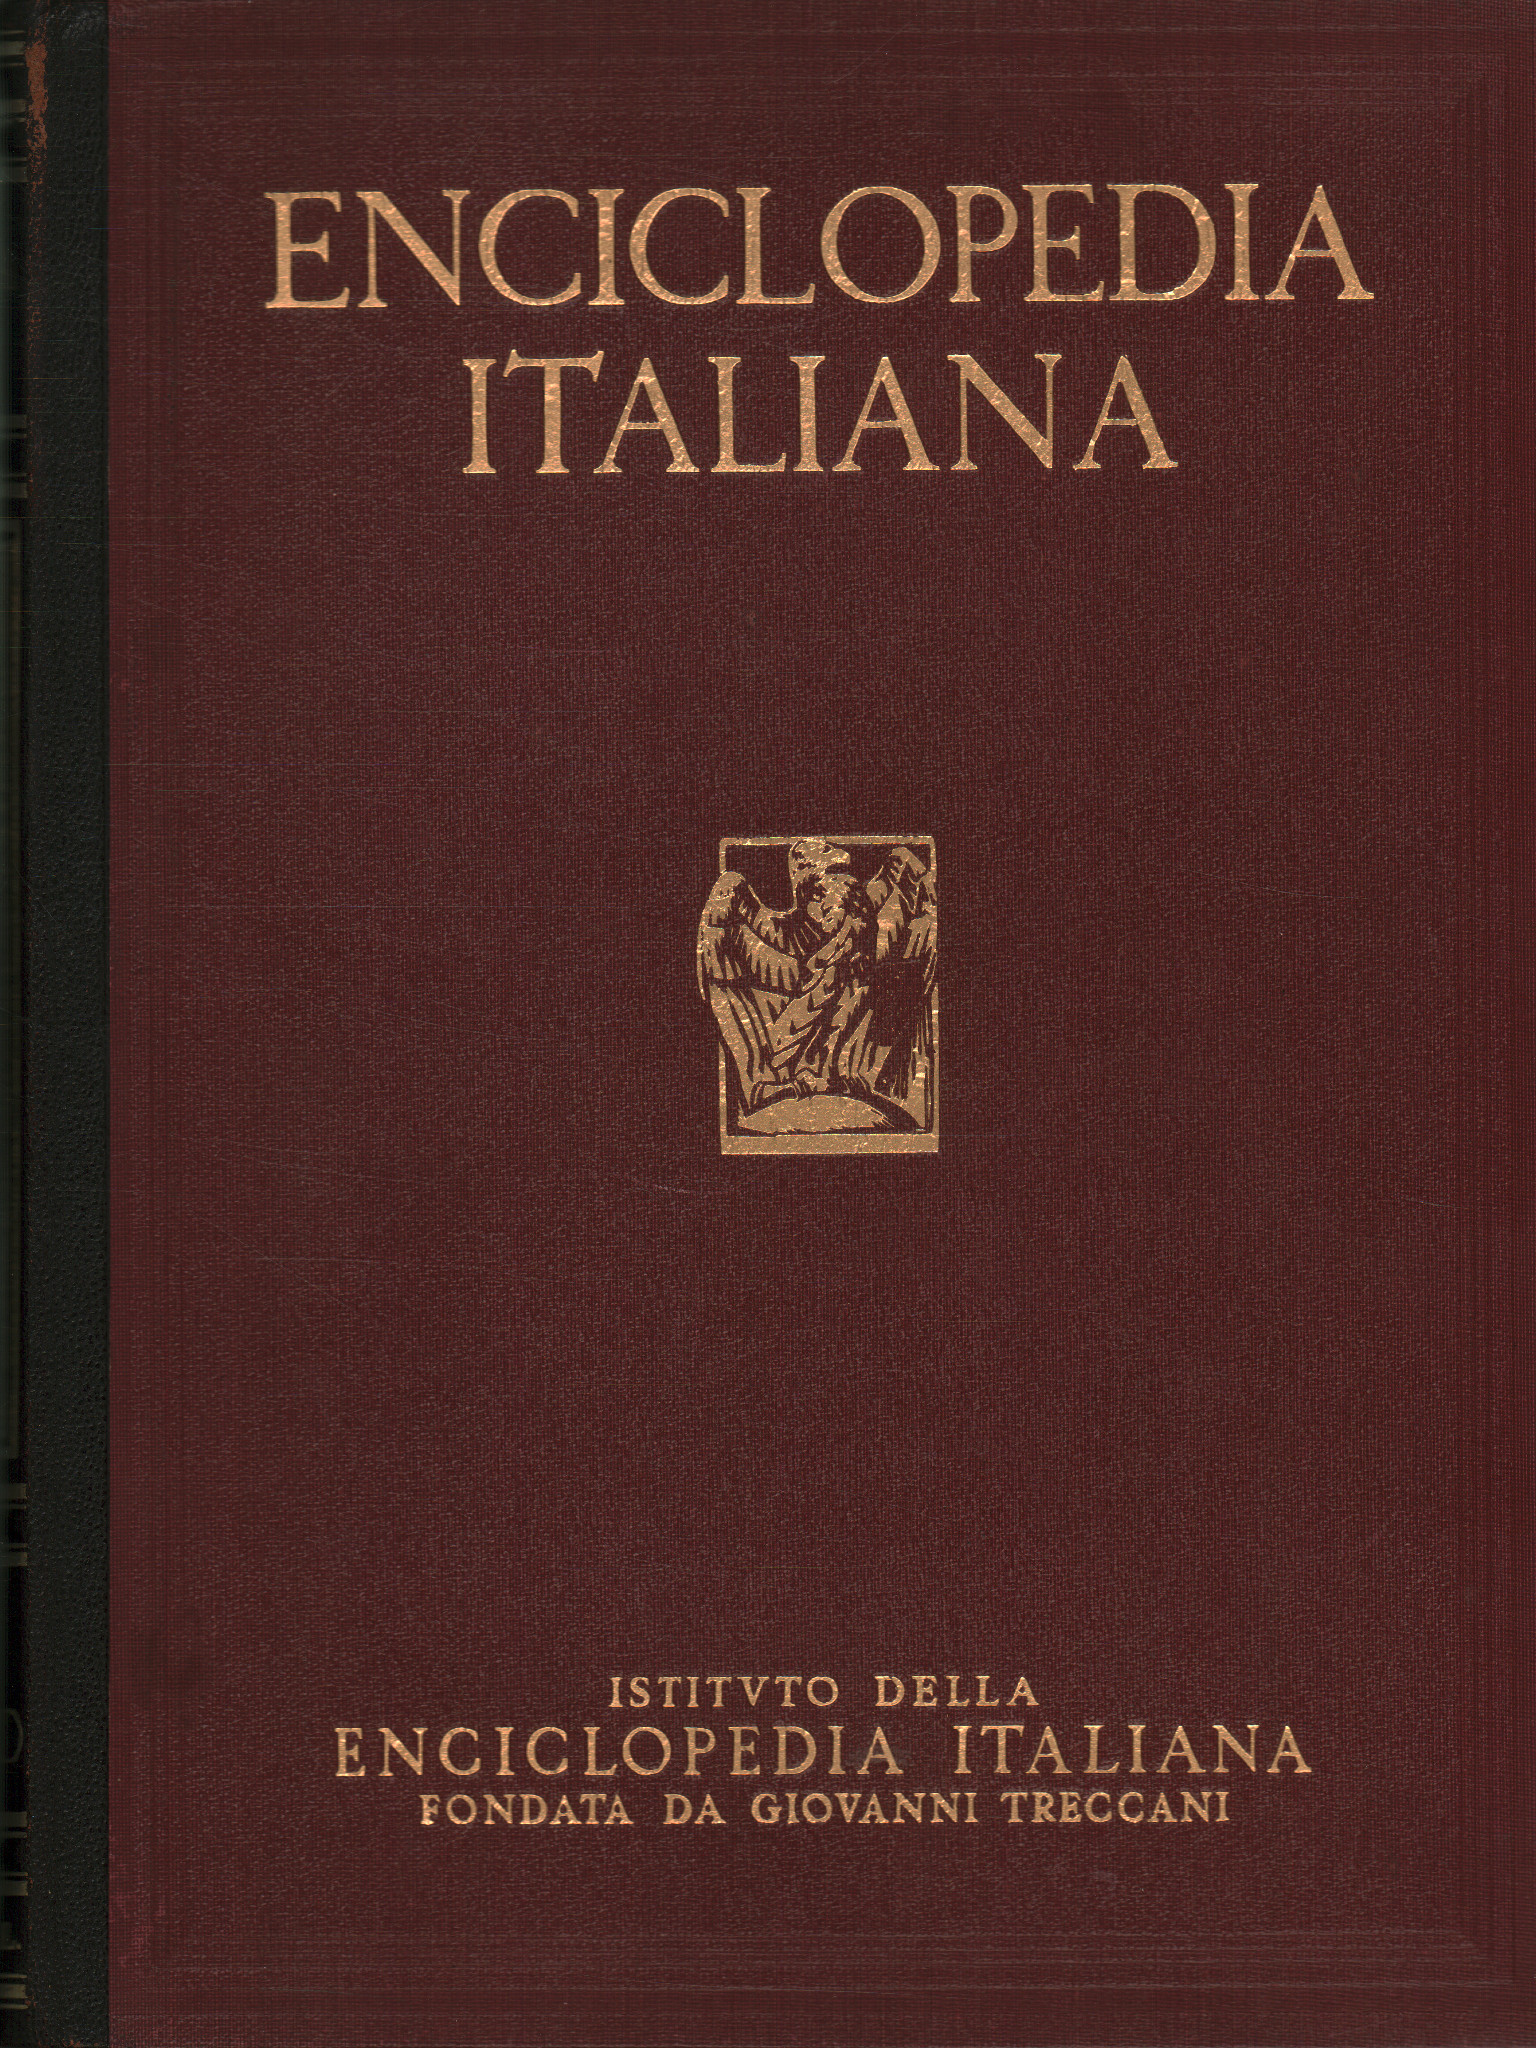 Italian Encyclopedia of Sciences, Letters and Arts, AA.VV.